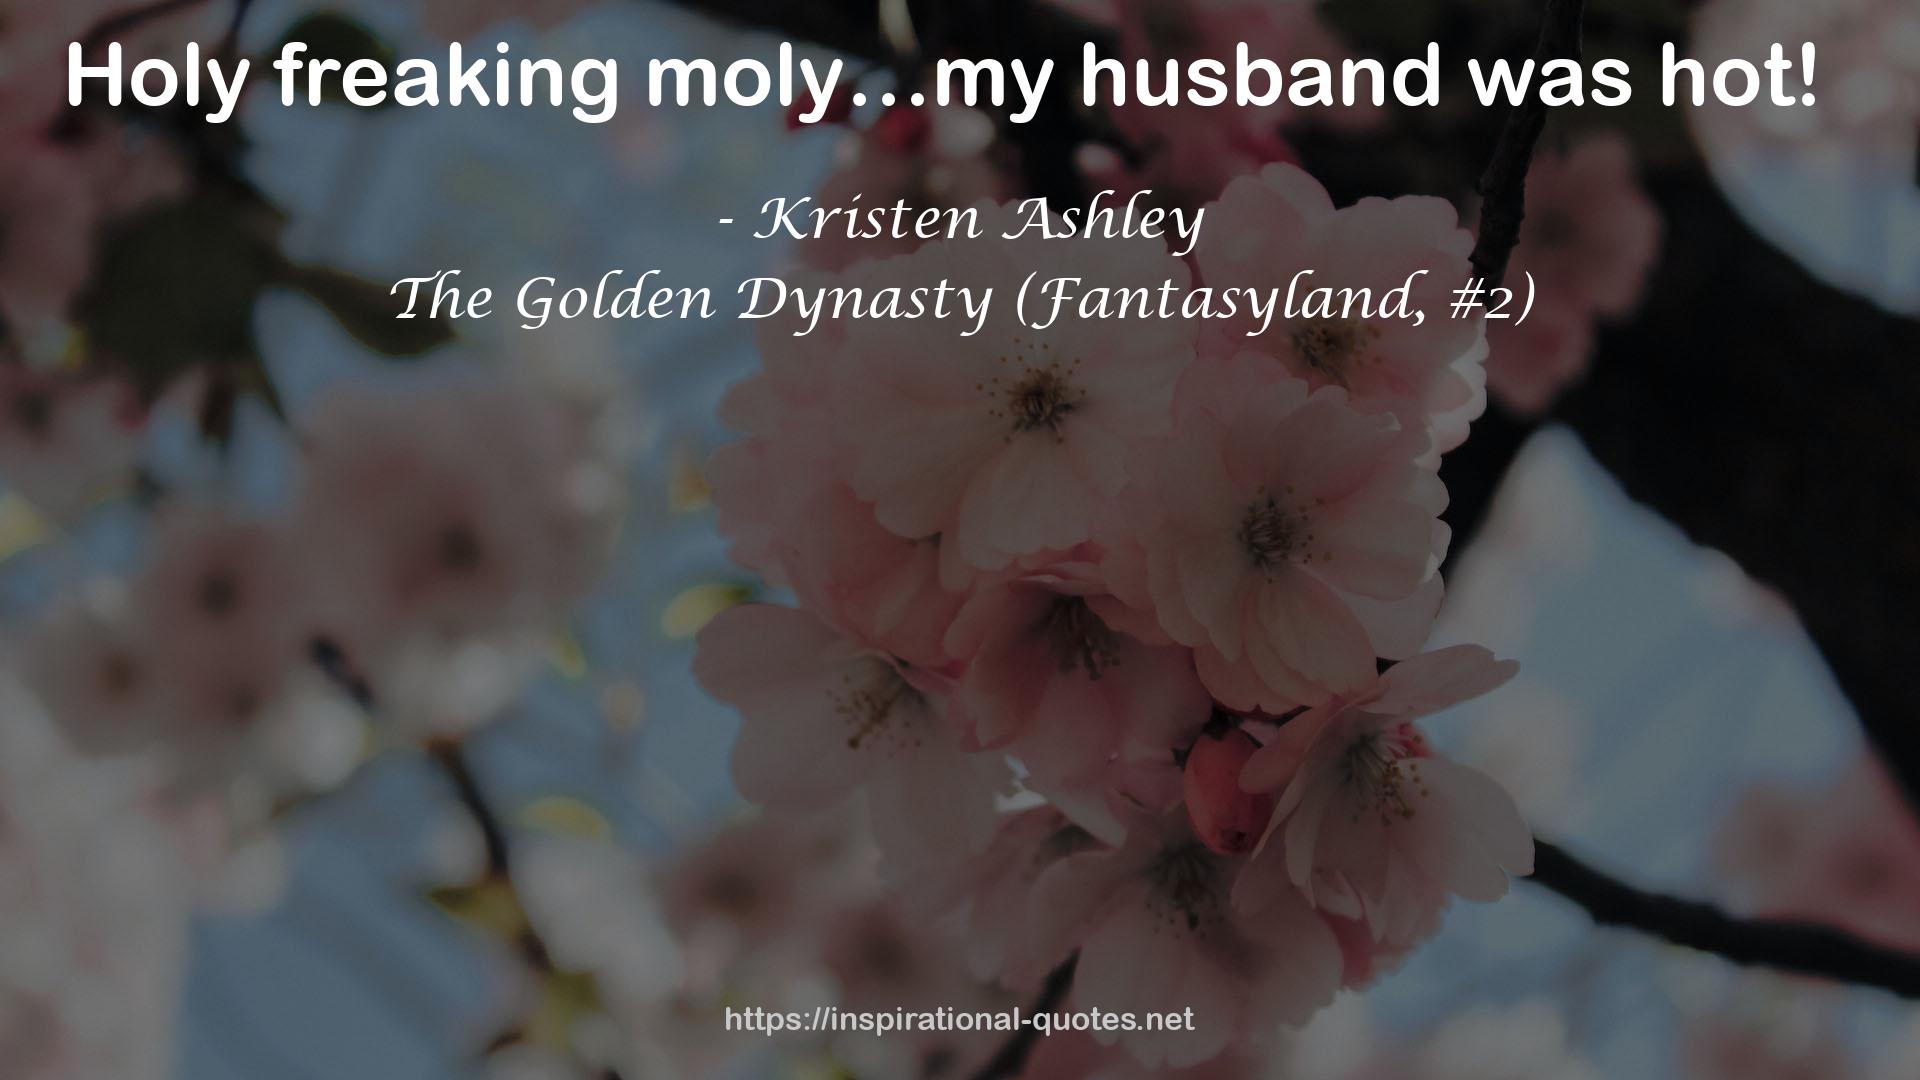 The Golden Dynasty (Fantasyland, #2) QUOTES